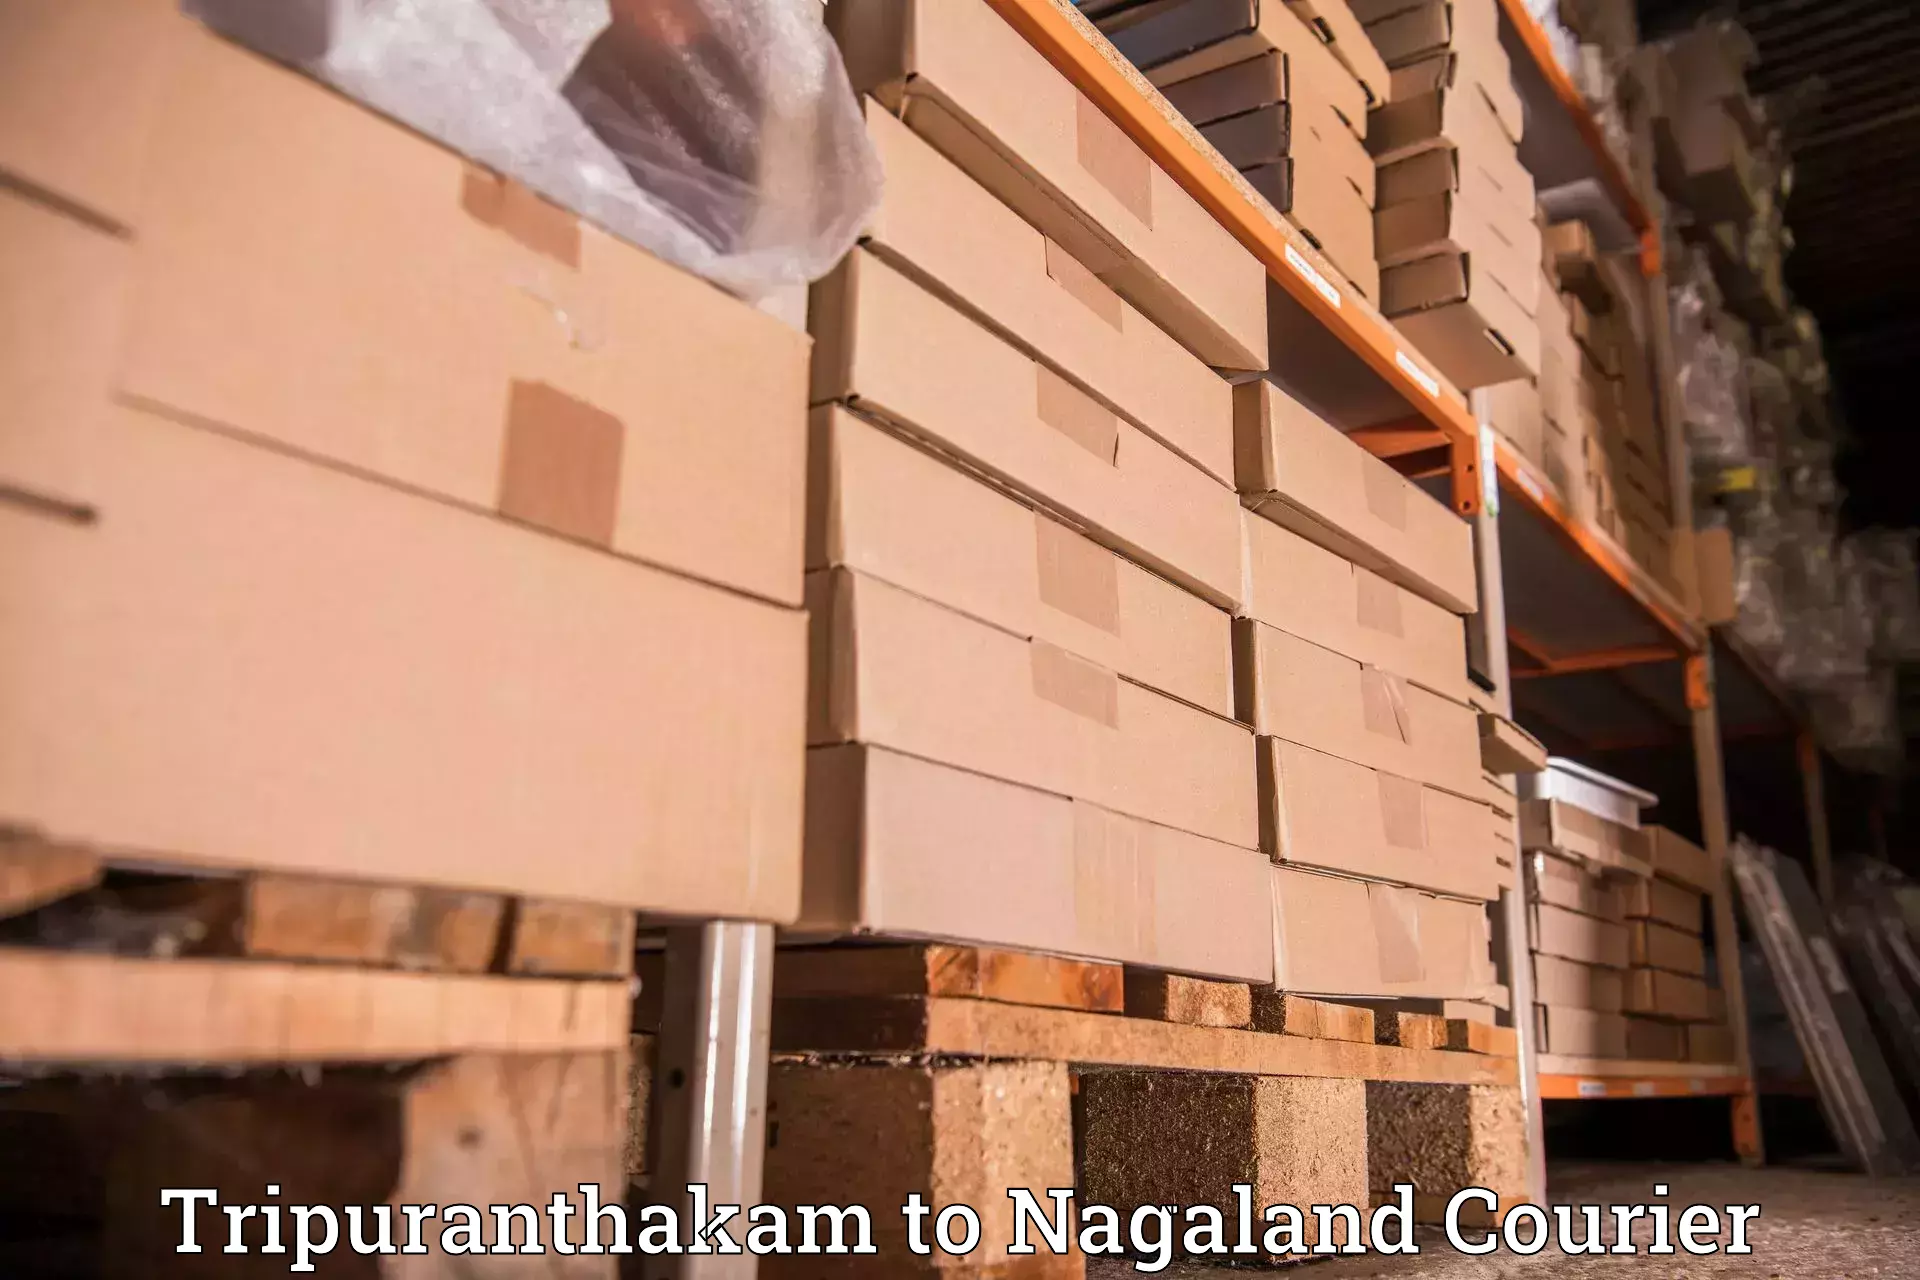 Flexible delivery scheduling Tripuranthakam to Nagaland